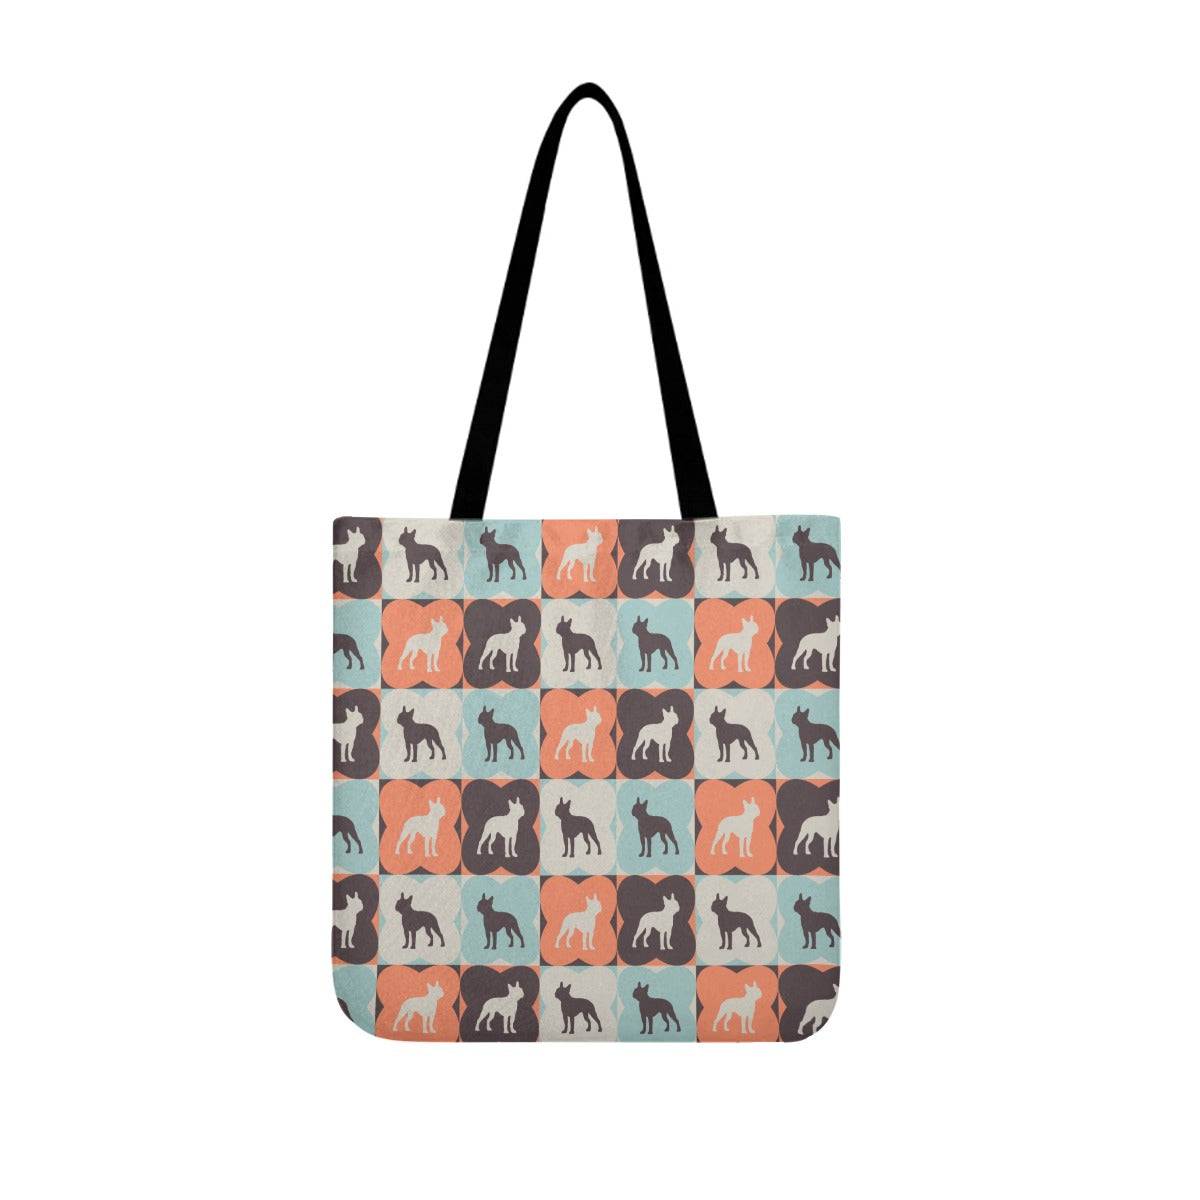 Snookie - Cloth Tote Bags for Boston Terrier lovers